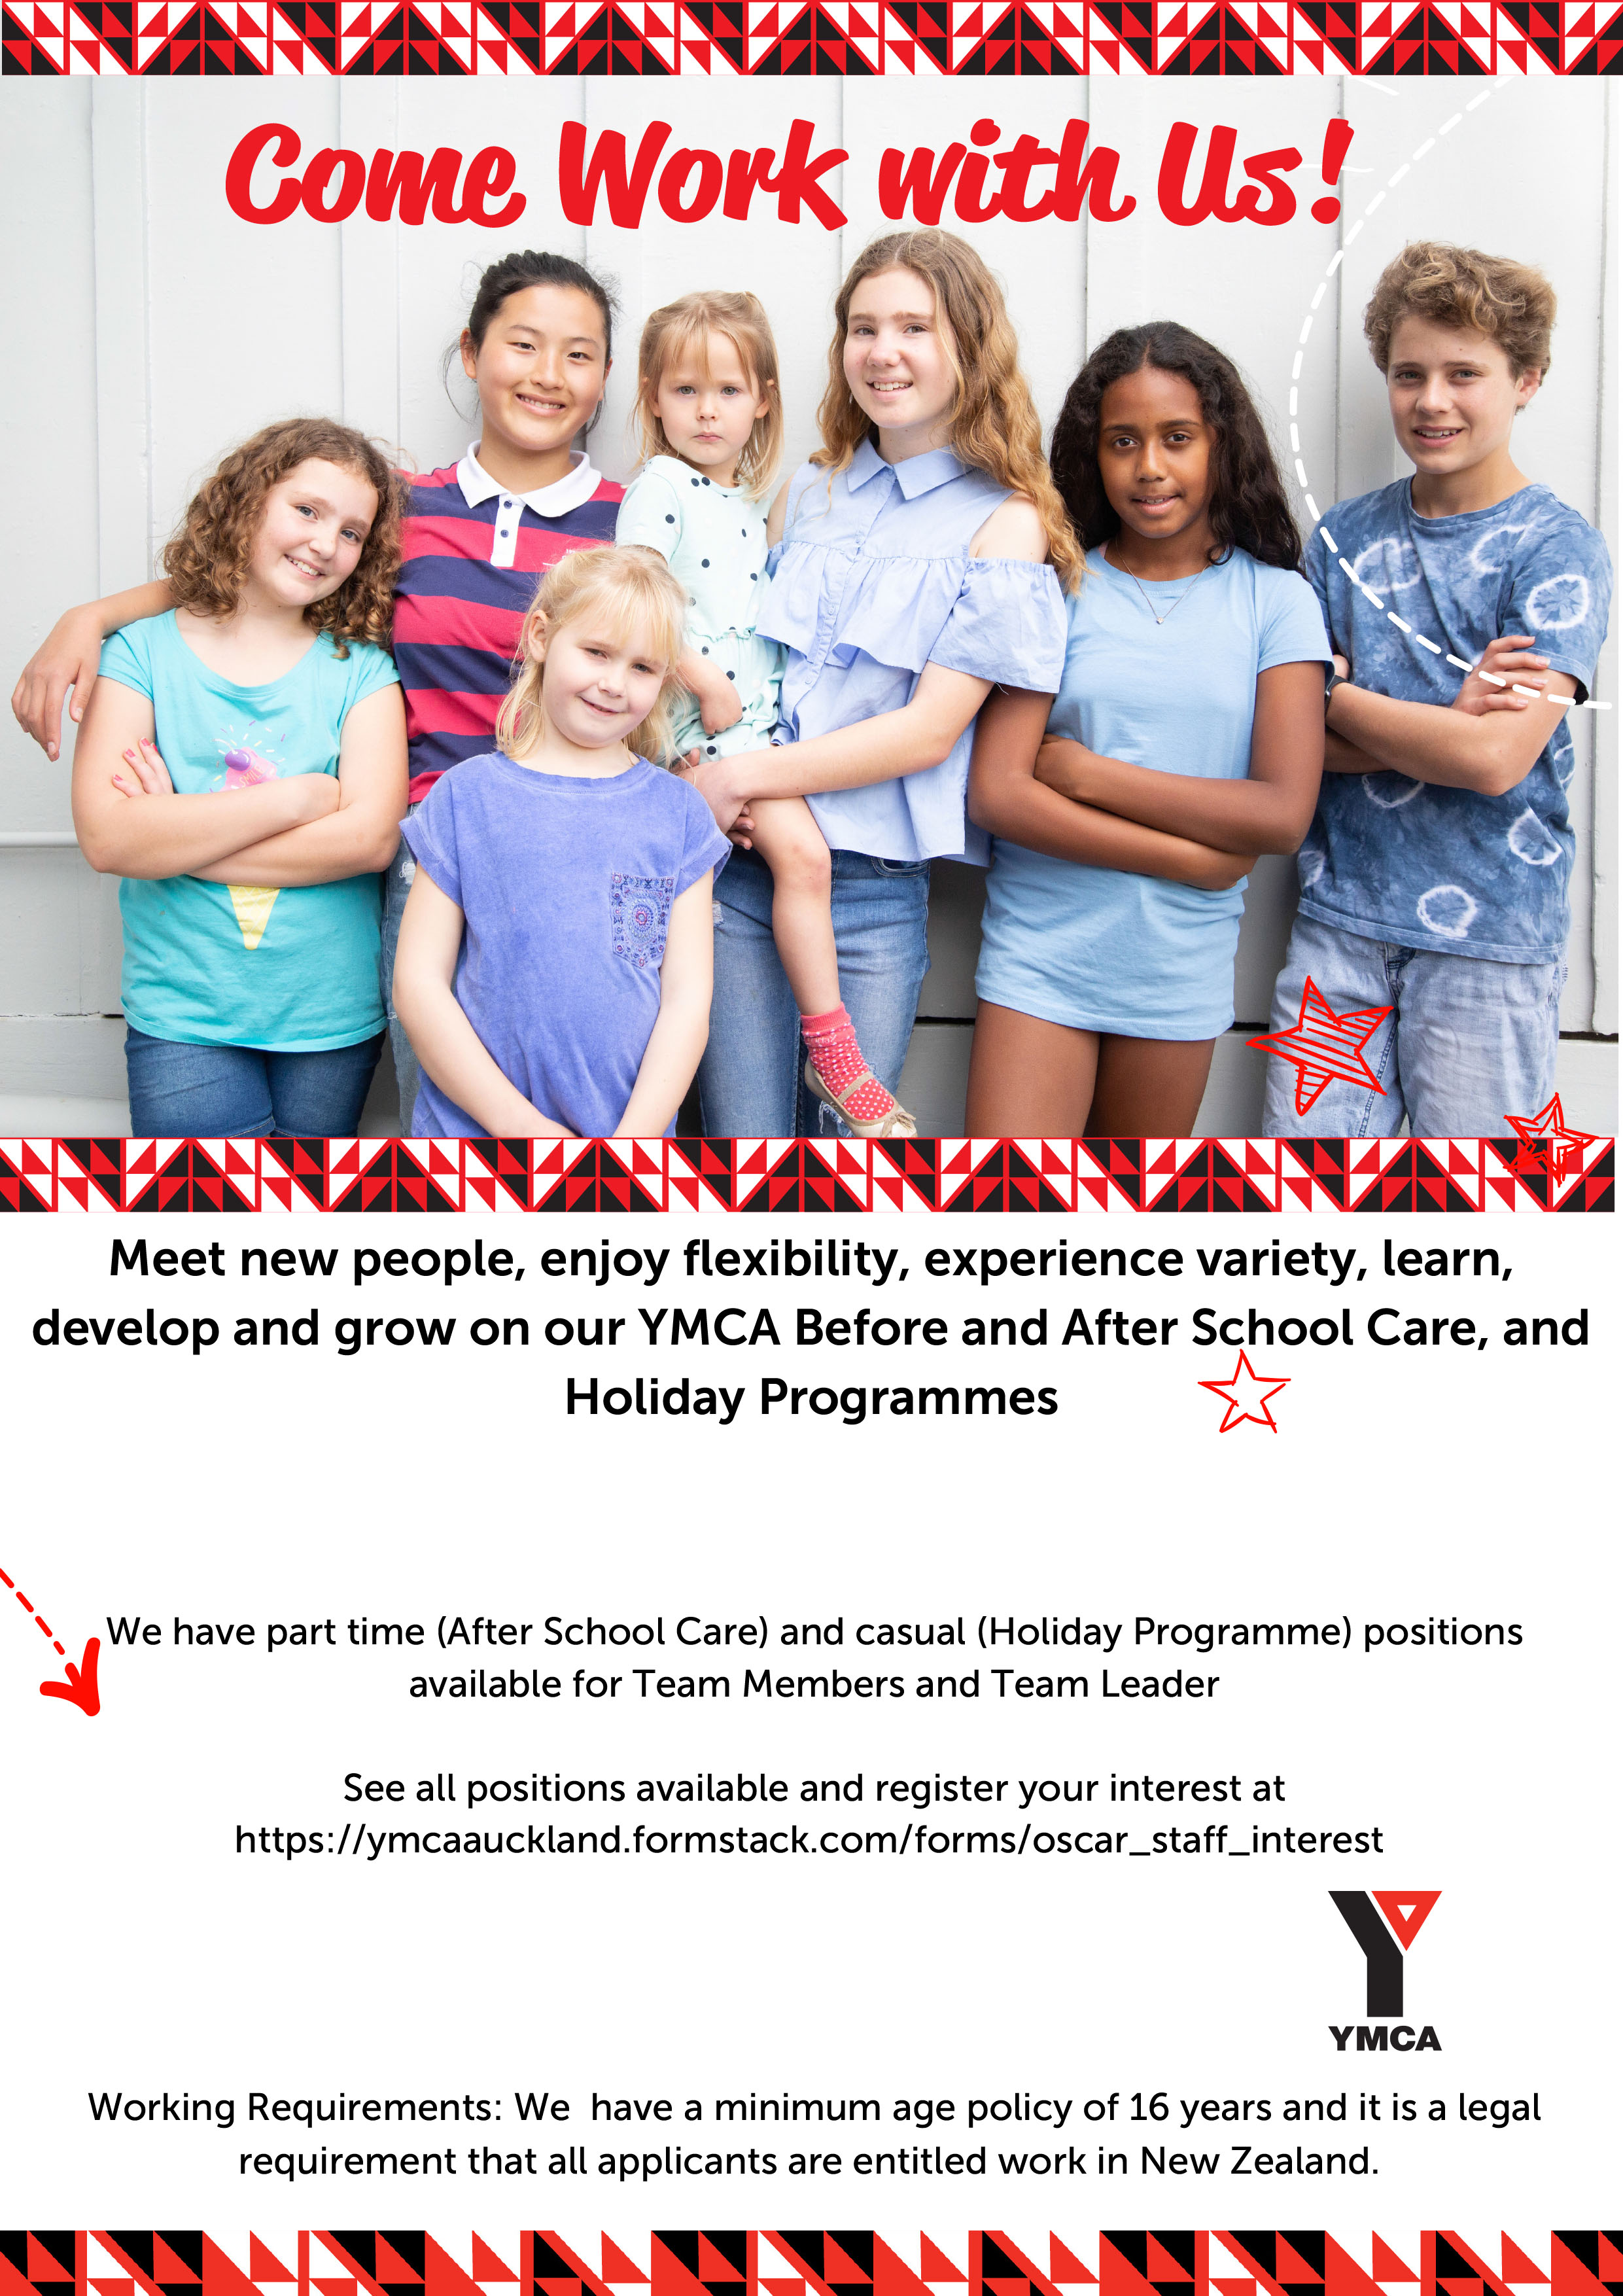 YMCA Holiday Programme Positions